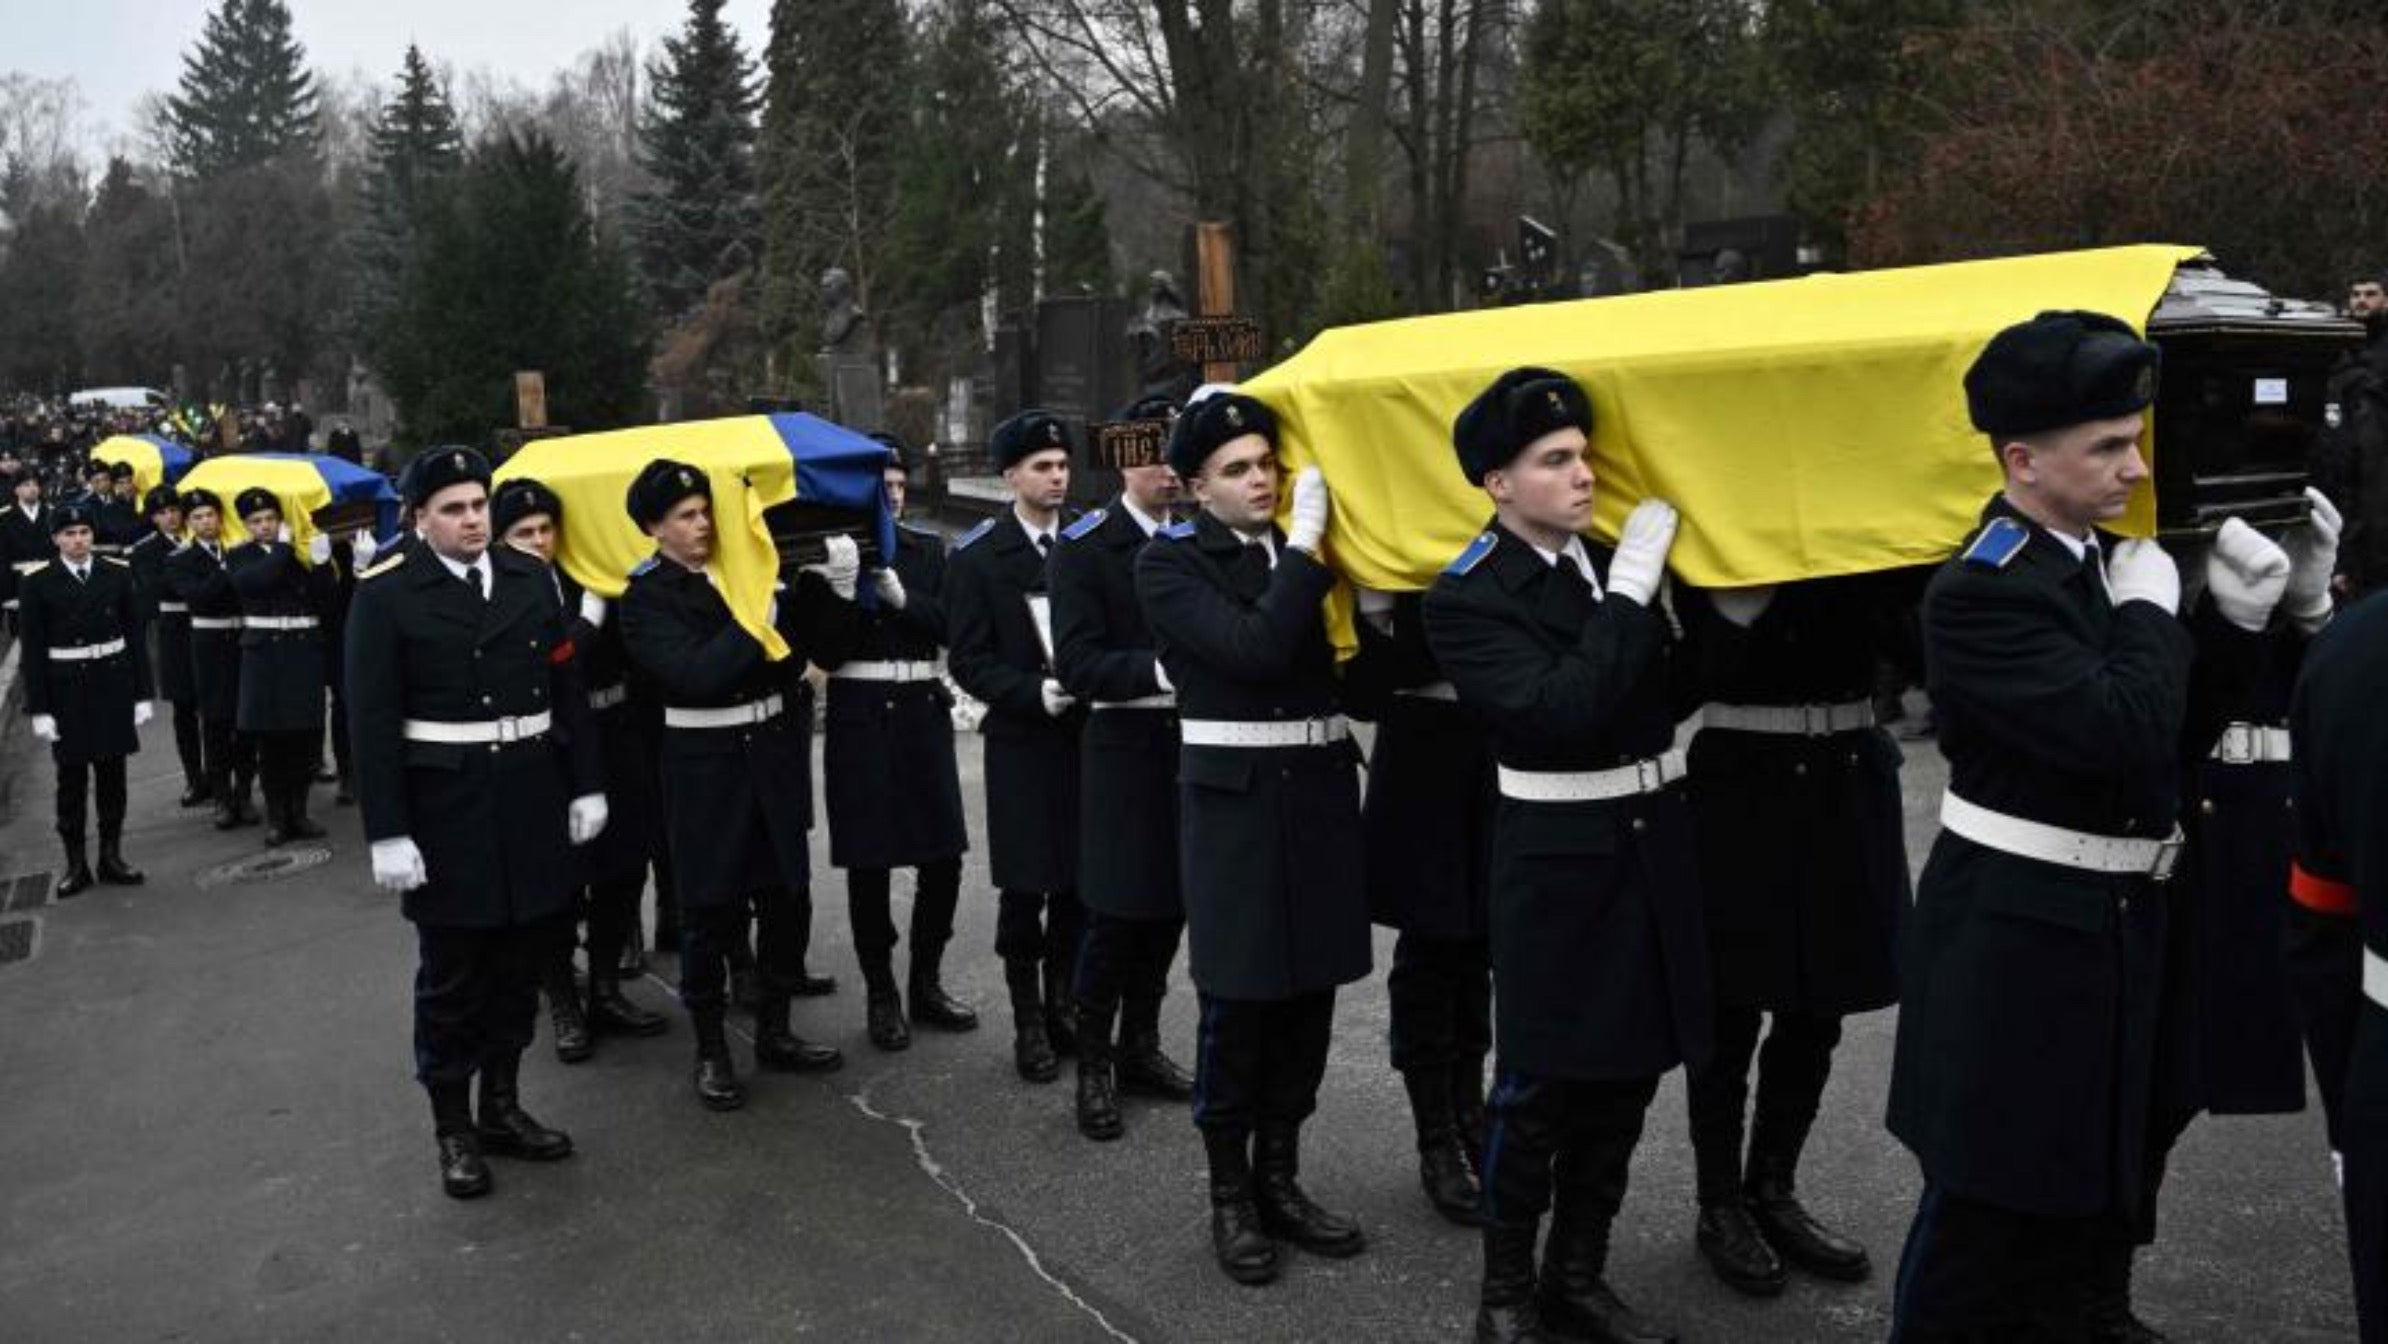 Ukraine mourns the Minister of the Interior and his colleagues, Magnate Daily